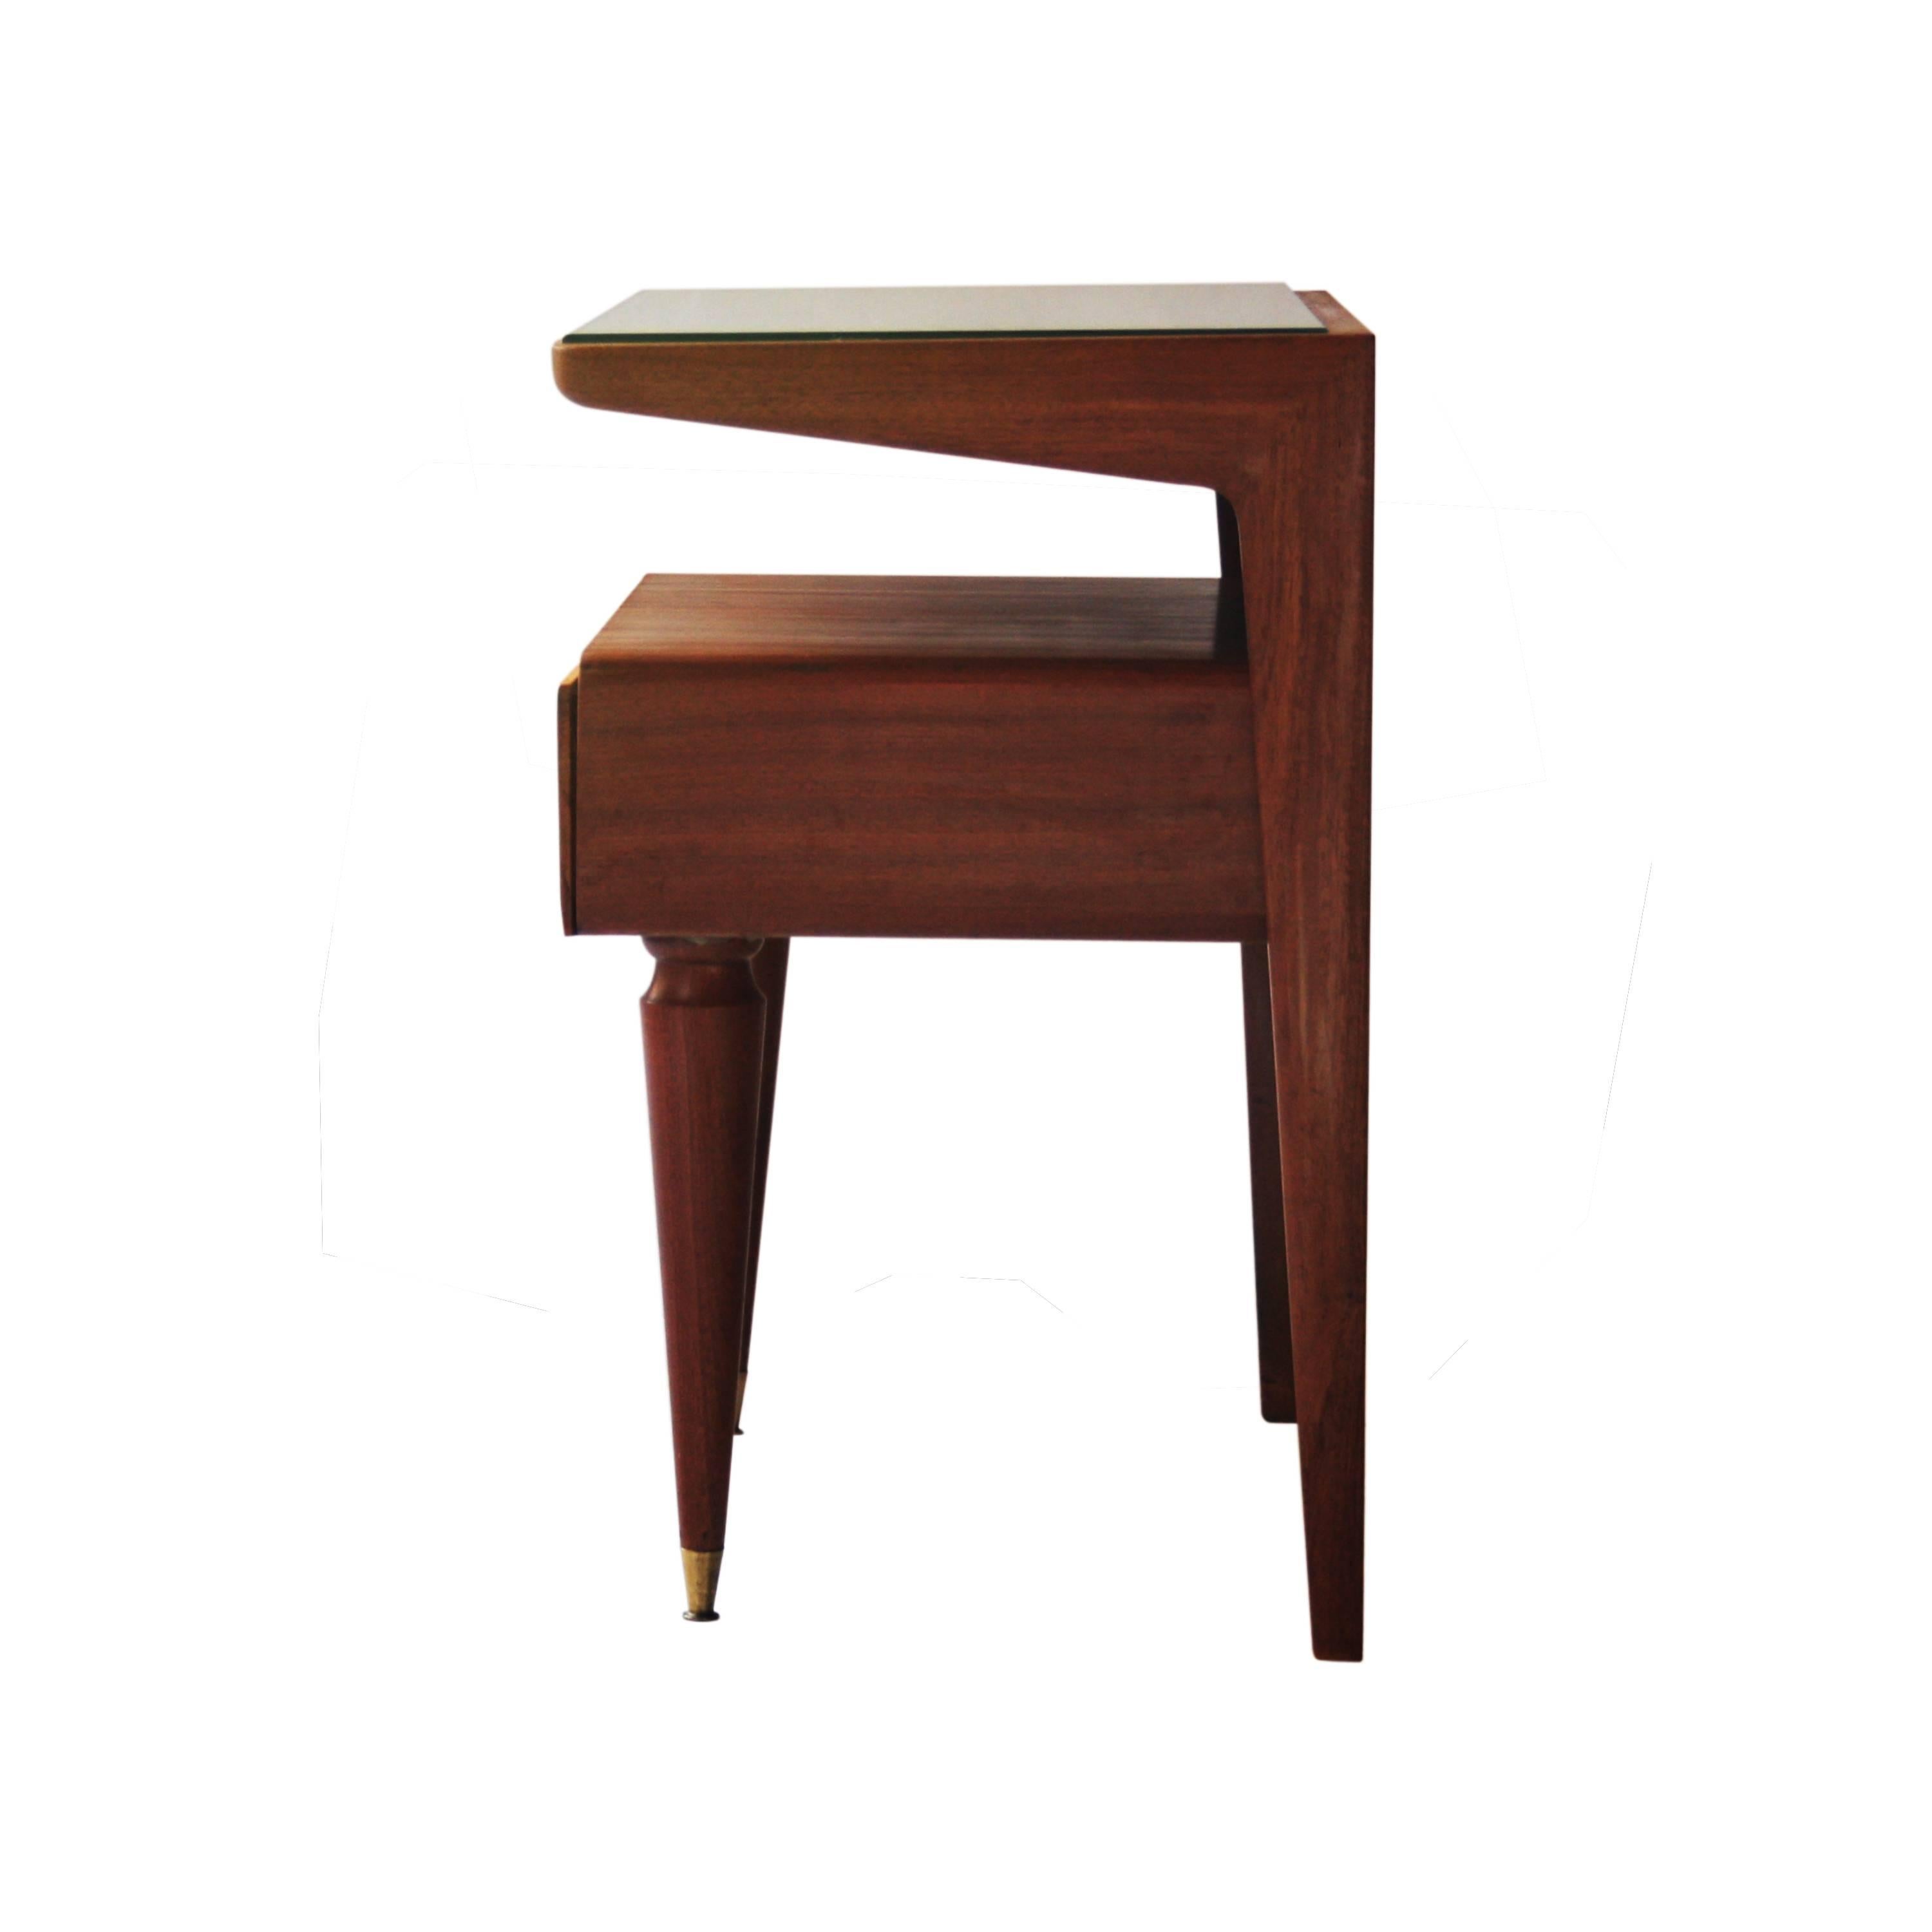 Mid-20th Century Pair of Night Tables Made of Rosewood, Italy, 1950